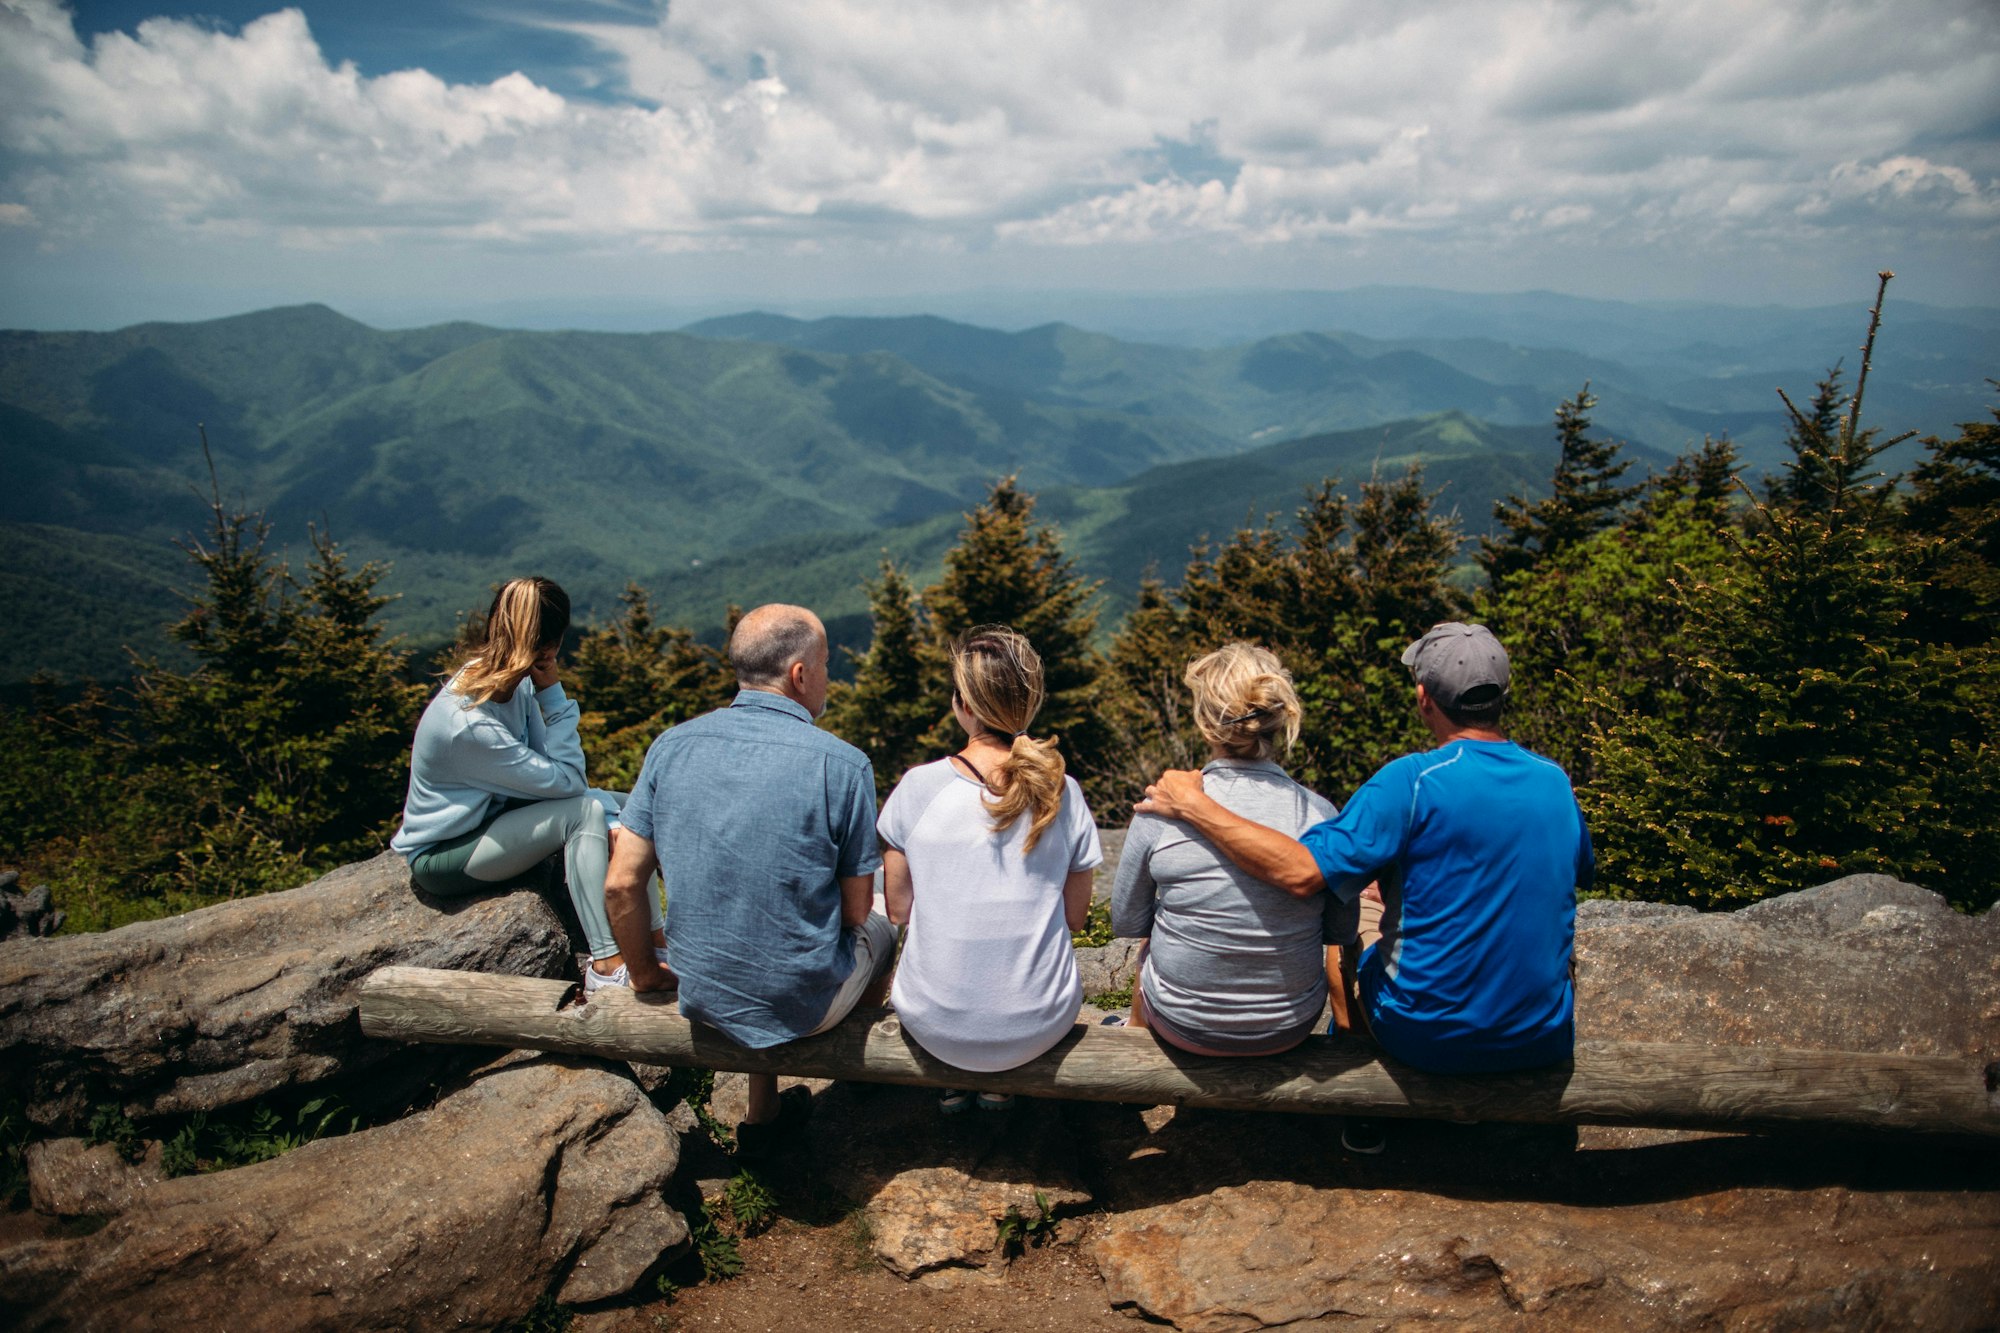 Five family members watching over the mountain valley, at the top of a mountain, relaxed